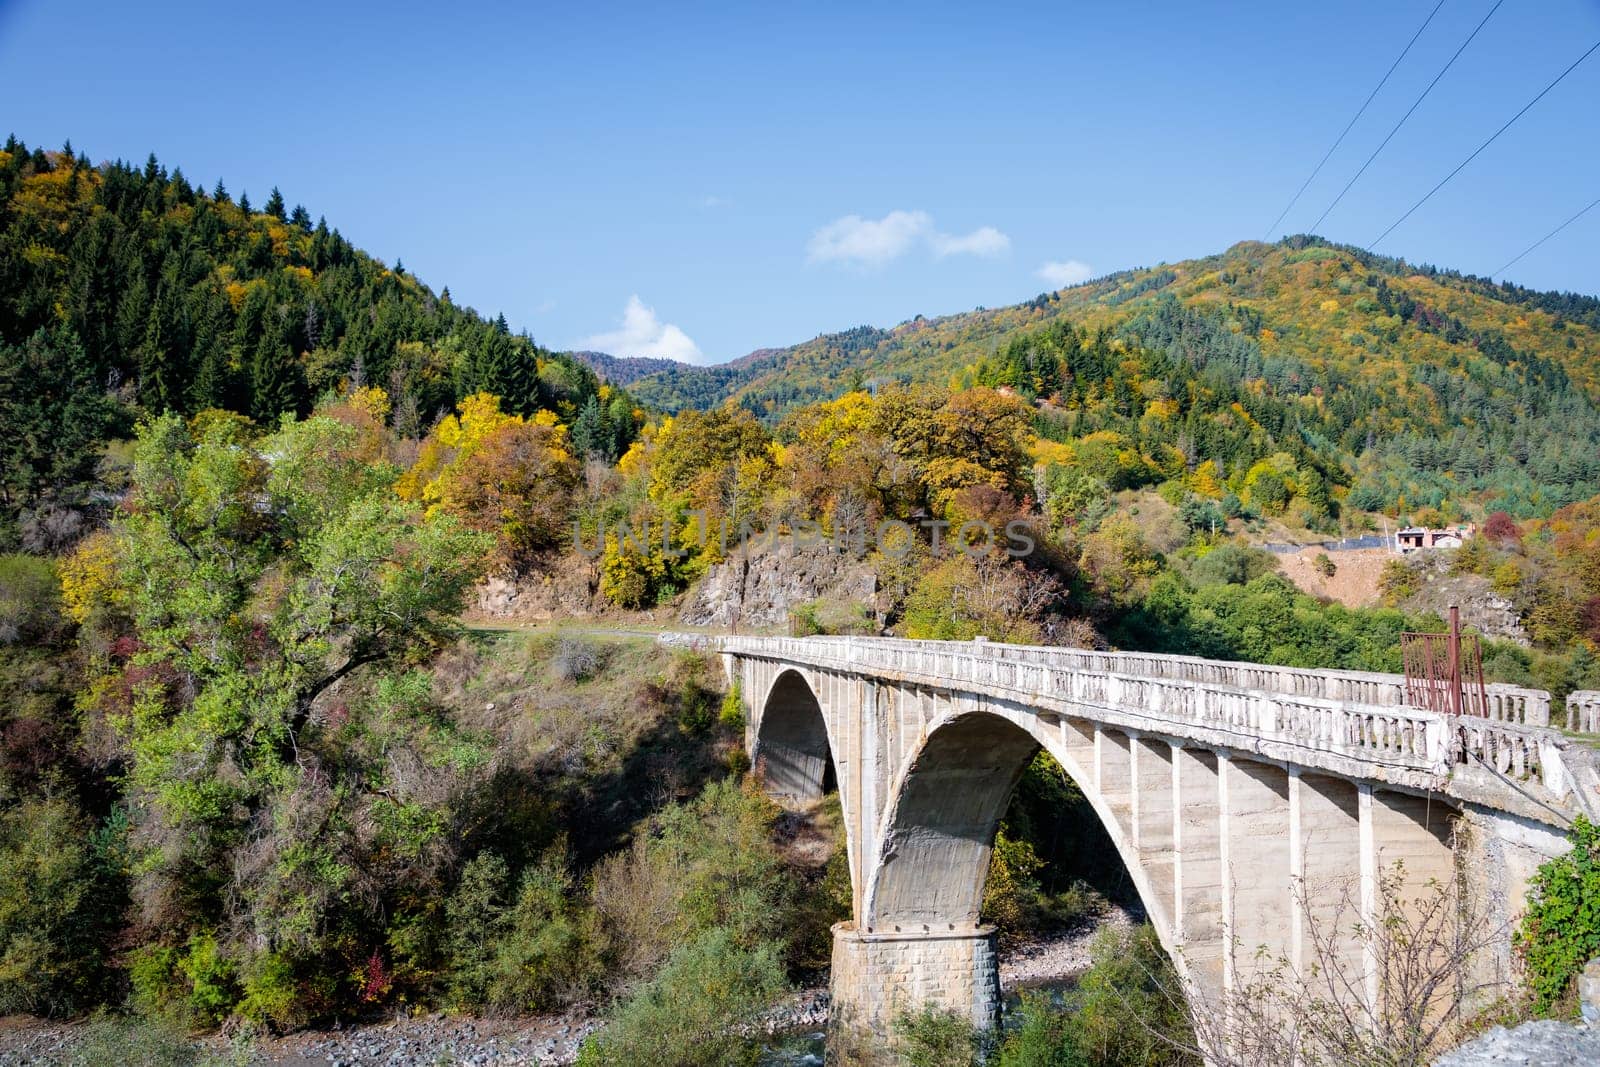 A stunning tall bridge spans over a serene river nestled in the midst of towering mountains. The impressive structure offers a captivating view of the natural landscape.